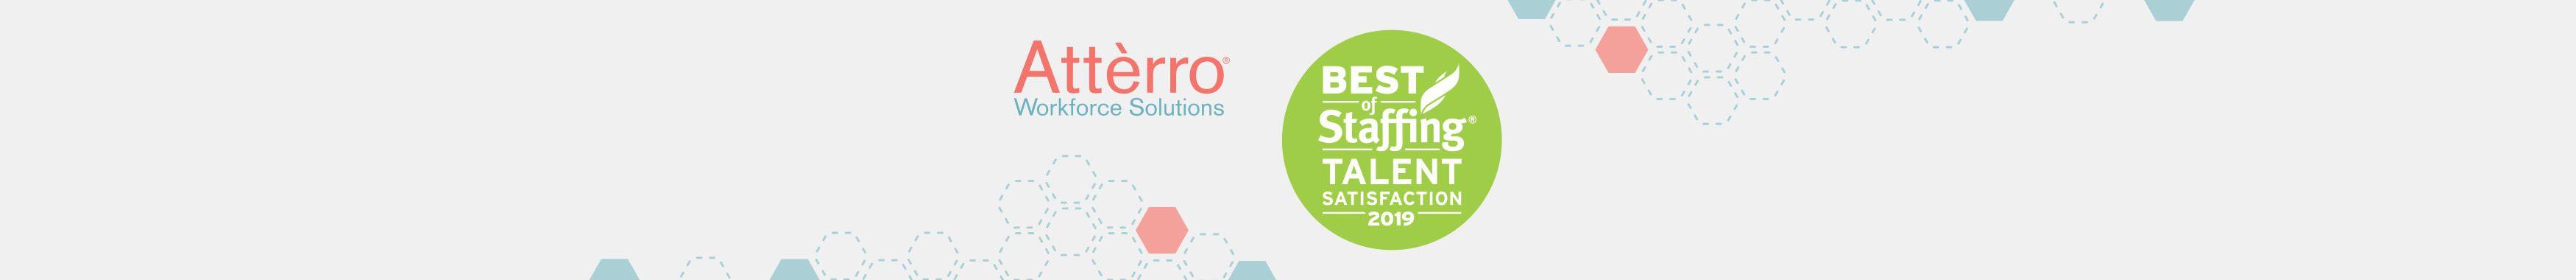 Atterro Logo - Specialty Staffing & Contingent Workforce Solutions